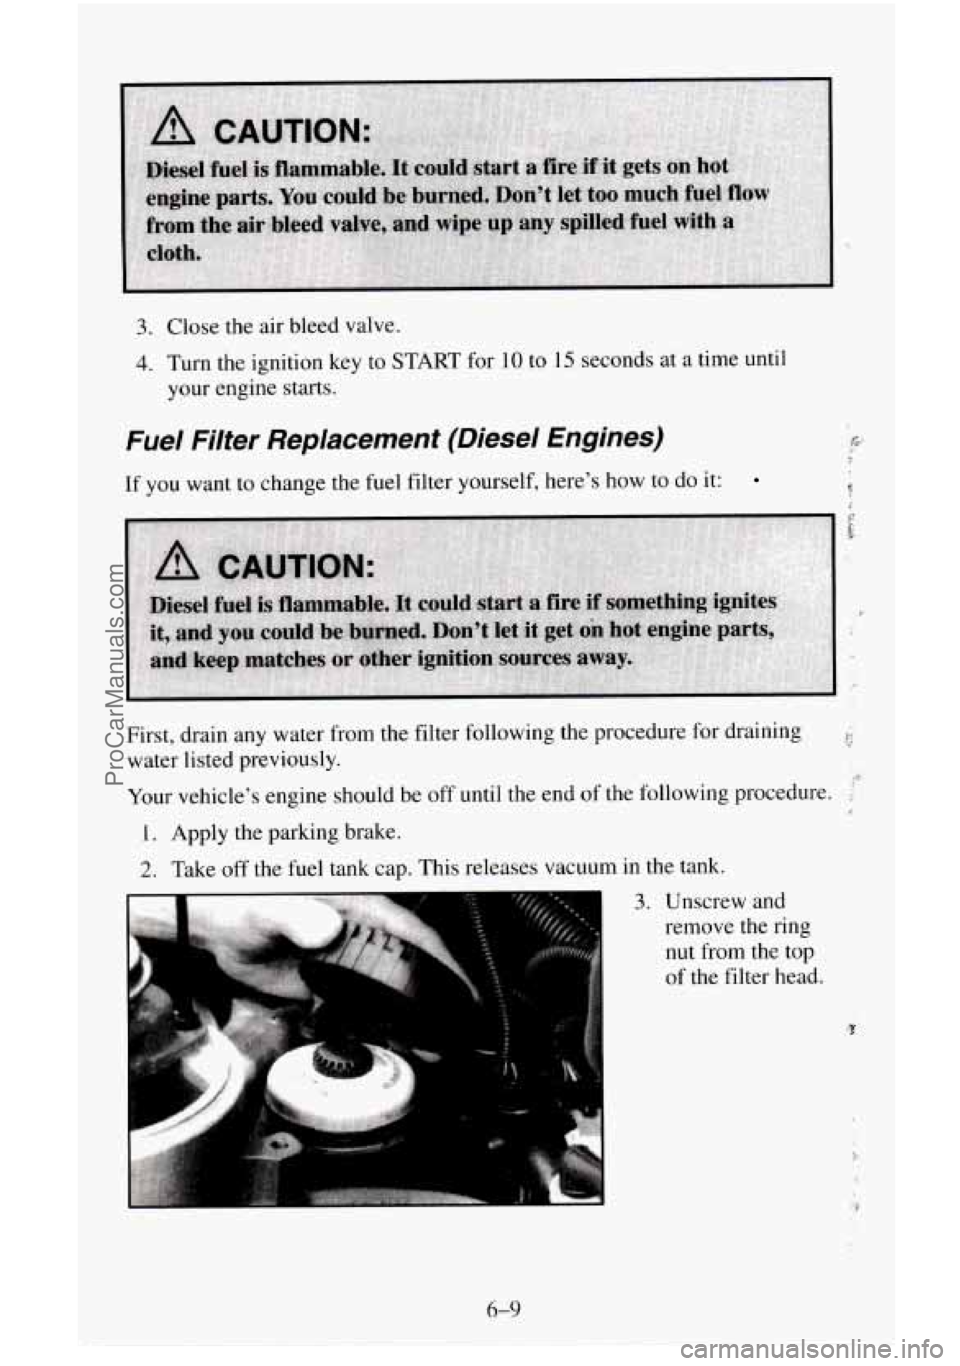 CHEVROLET SUBURBAN 1996  Owners Manual 3. Close the  air  bleed valve. 
4. Turn the  ignition key to START  for 10 to 15 seconds  at a time until 
your  engine  starts. 
Fuel  Filter  Replacement  (Diesel  Engines) 
If  you  want to change